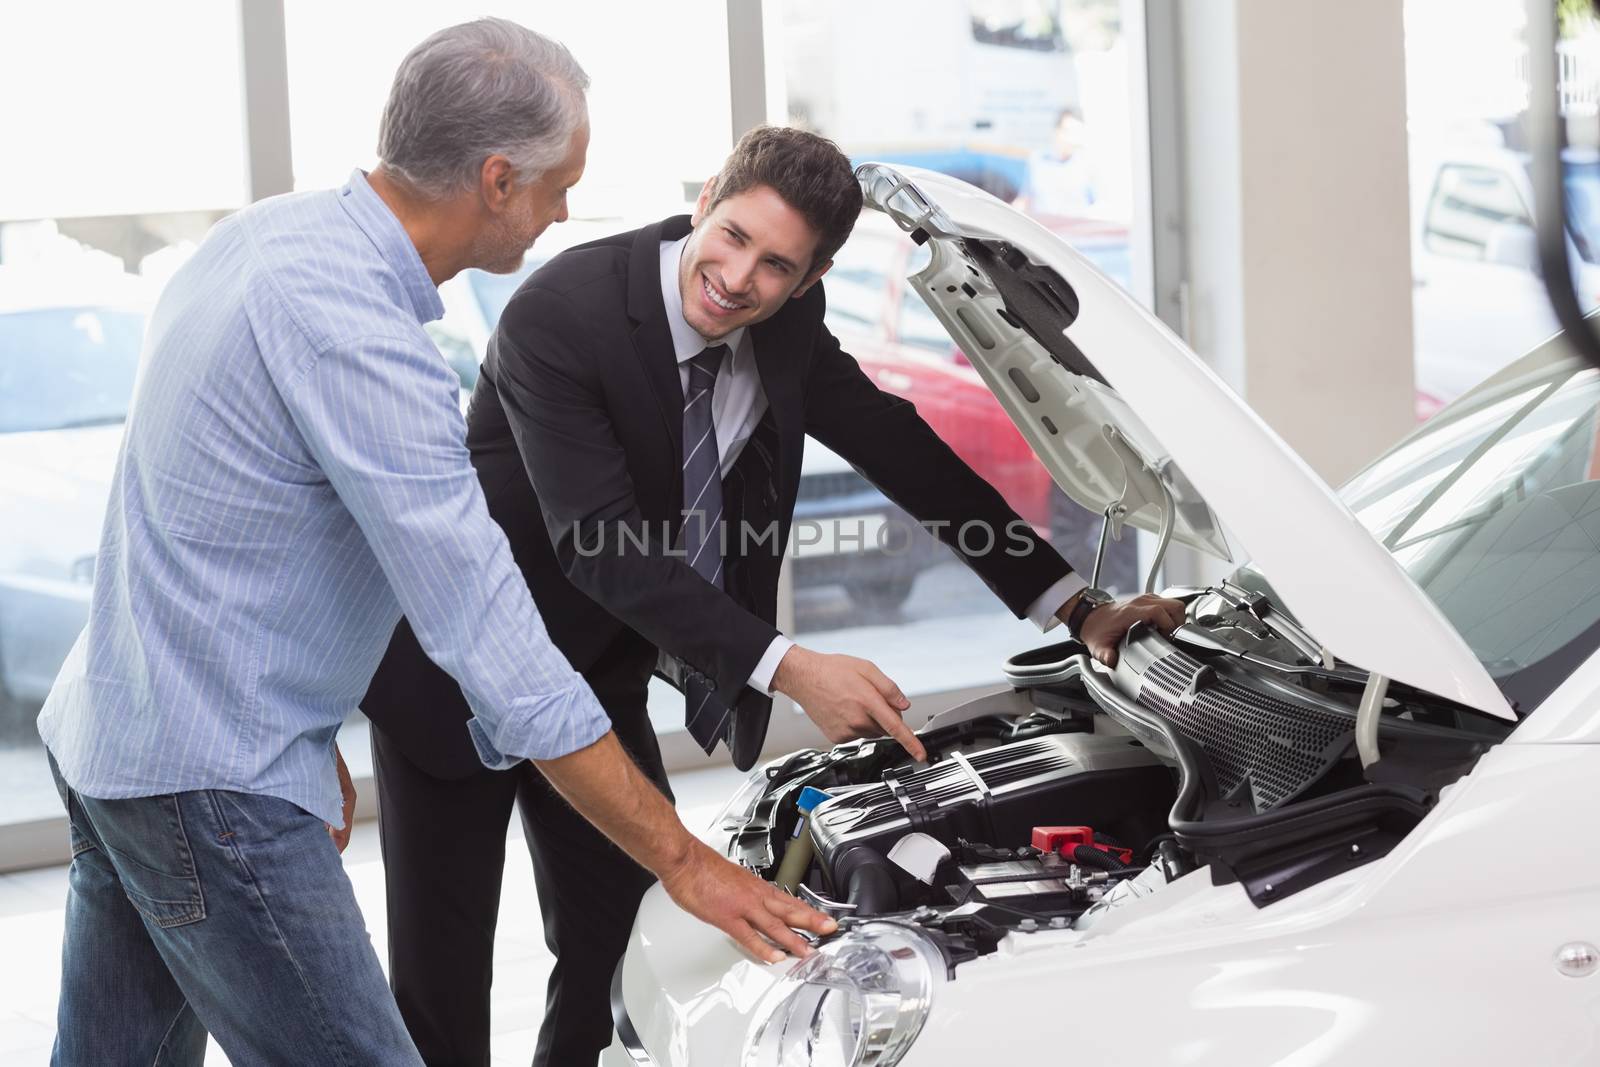 Two men looking at a car engine by Wavebreakmedia